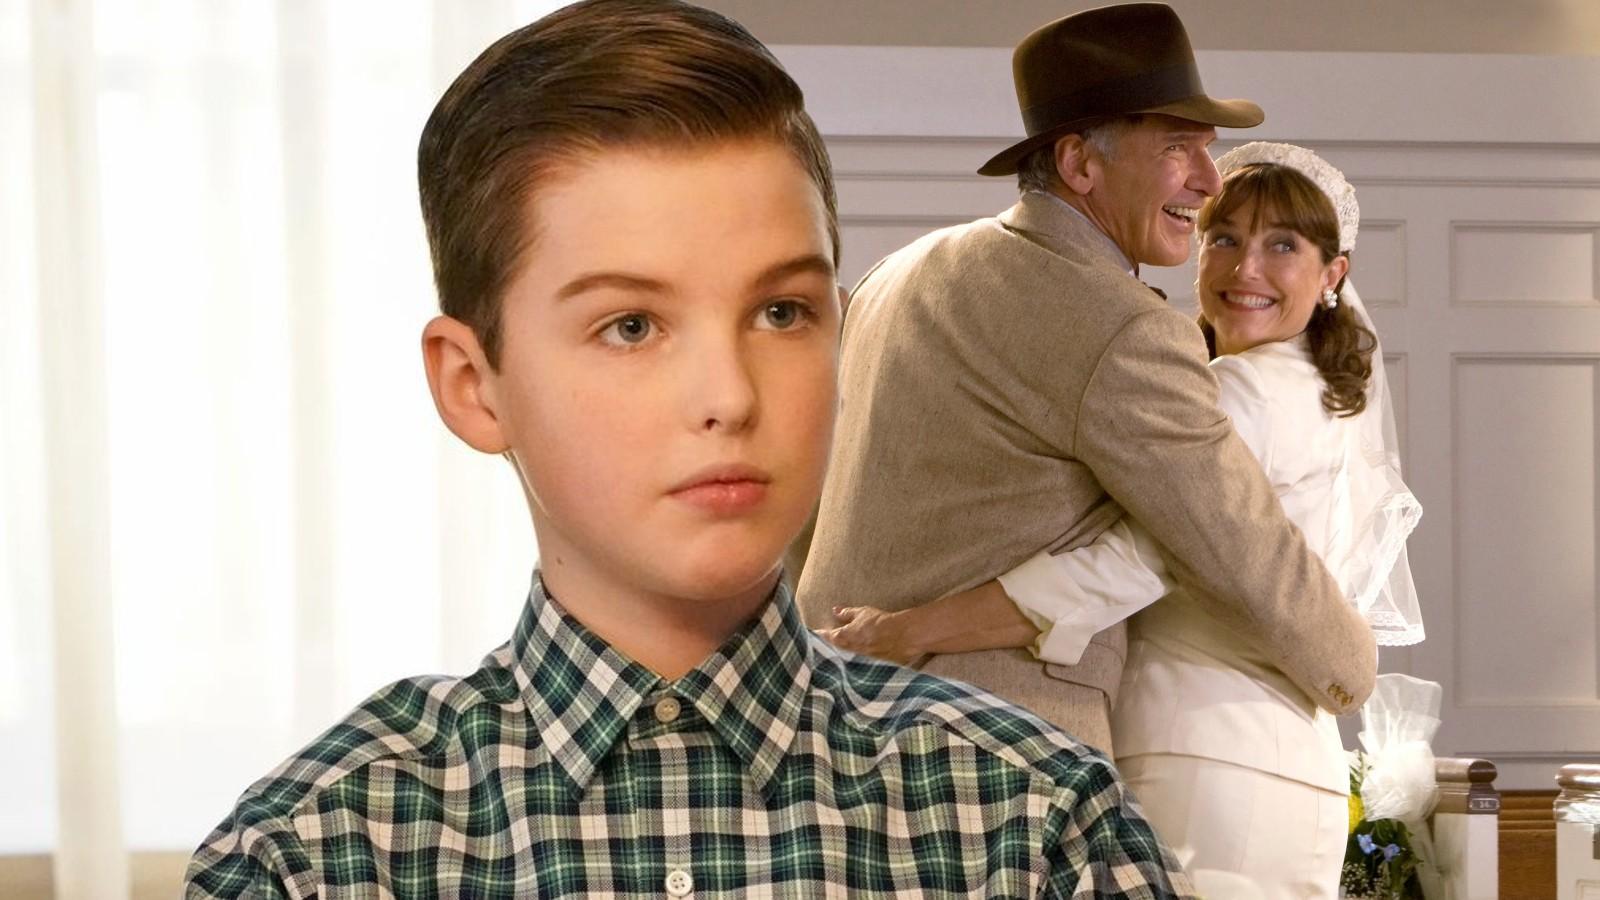 Iain Armitage in Young Sheldon and a still from Indiana Jones and the Kingdom of the Crystal Skull